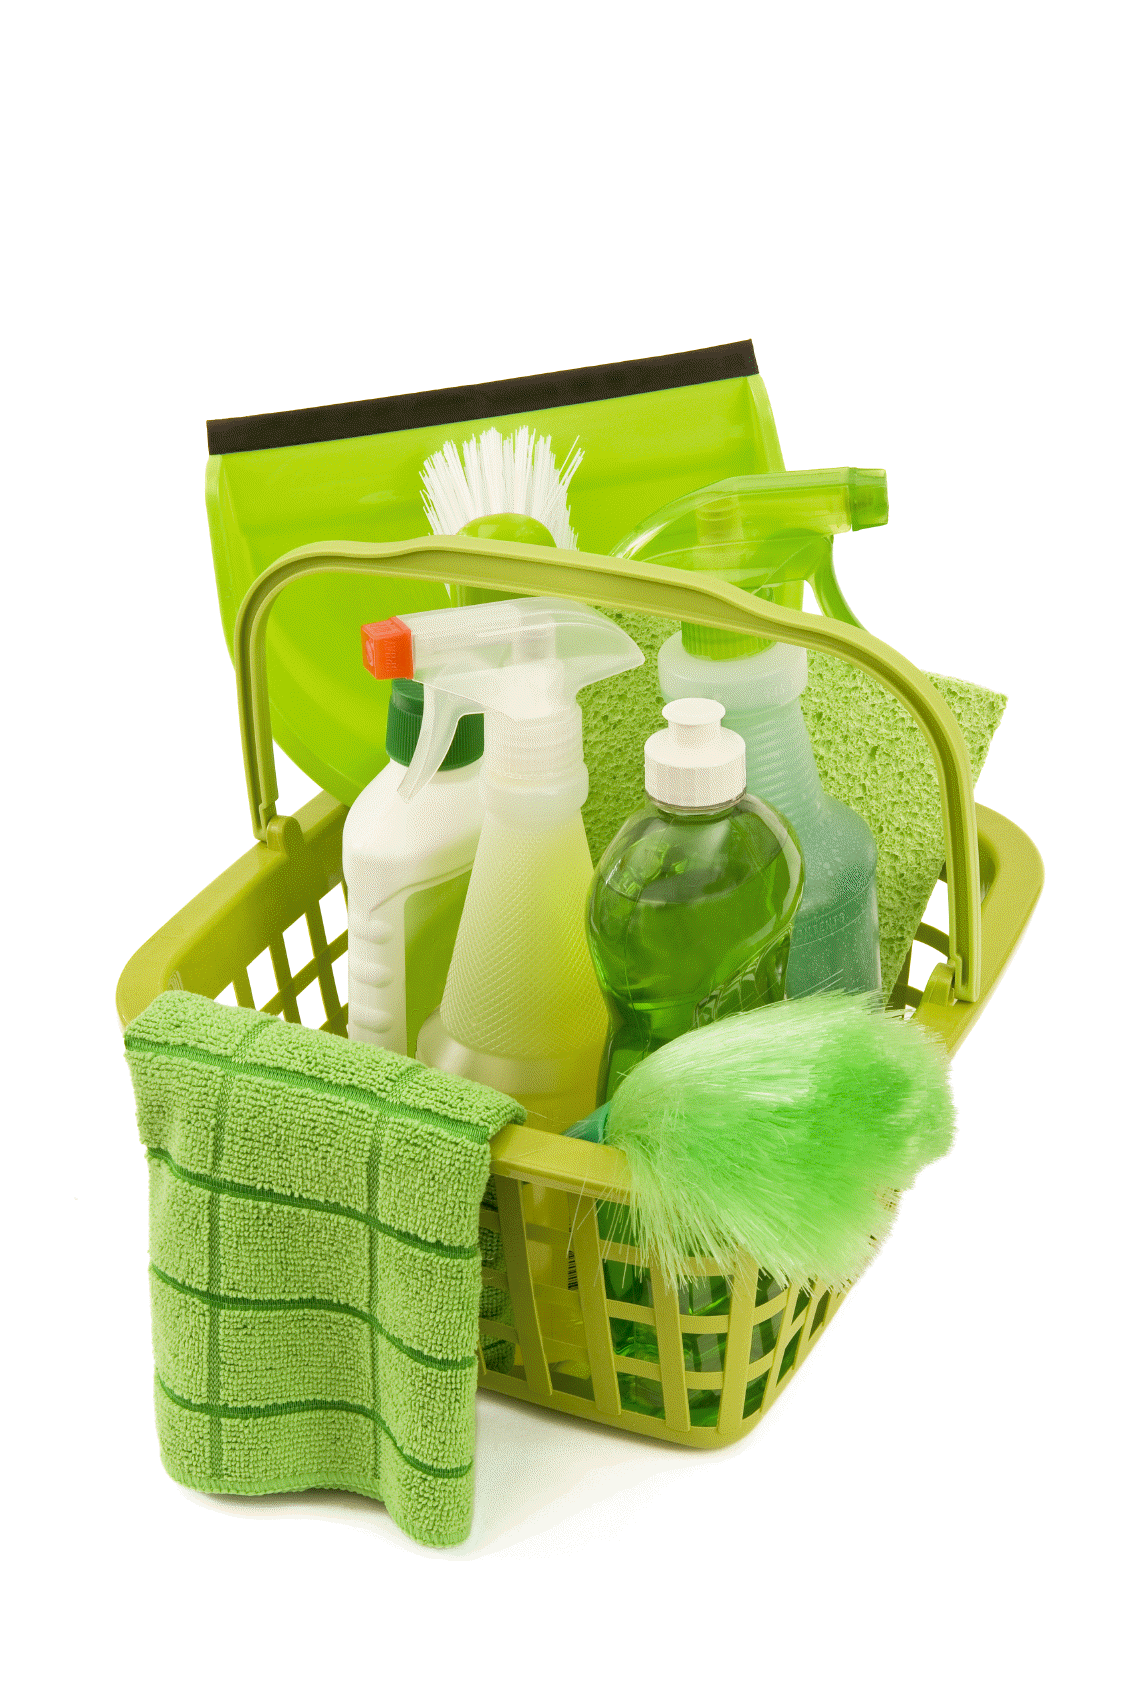 Green Cleaning Products to keep your Home Safe - Follow Green Living